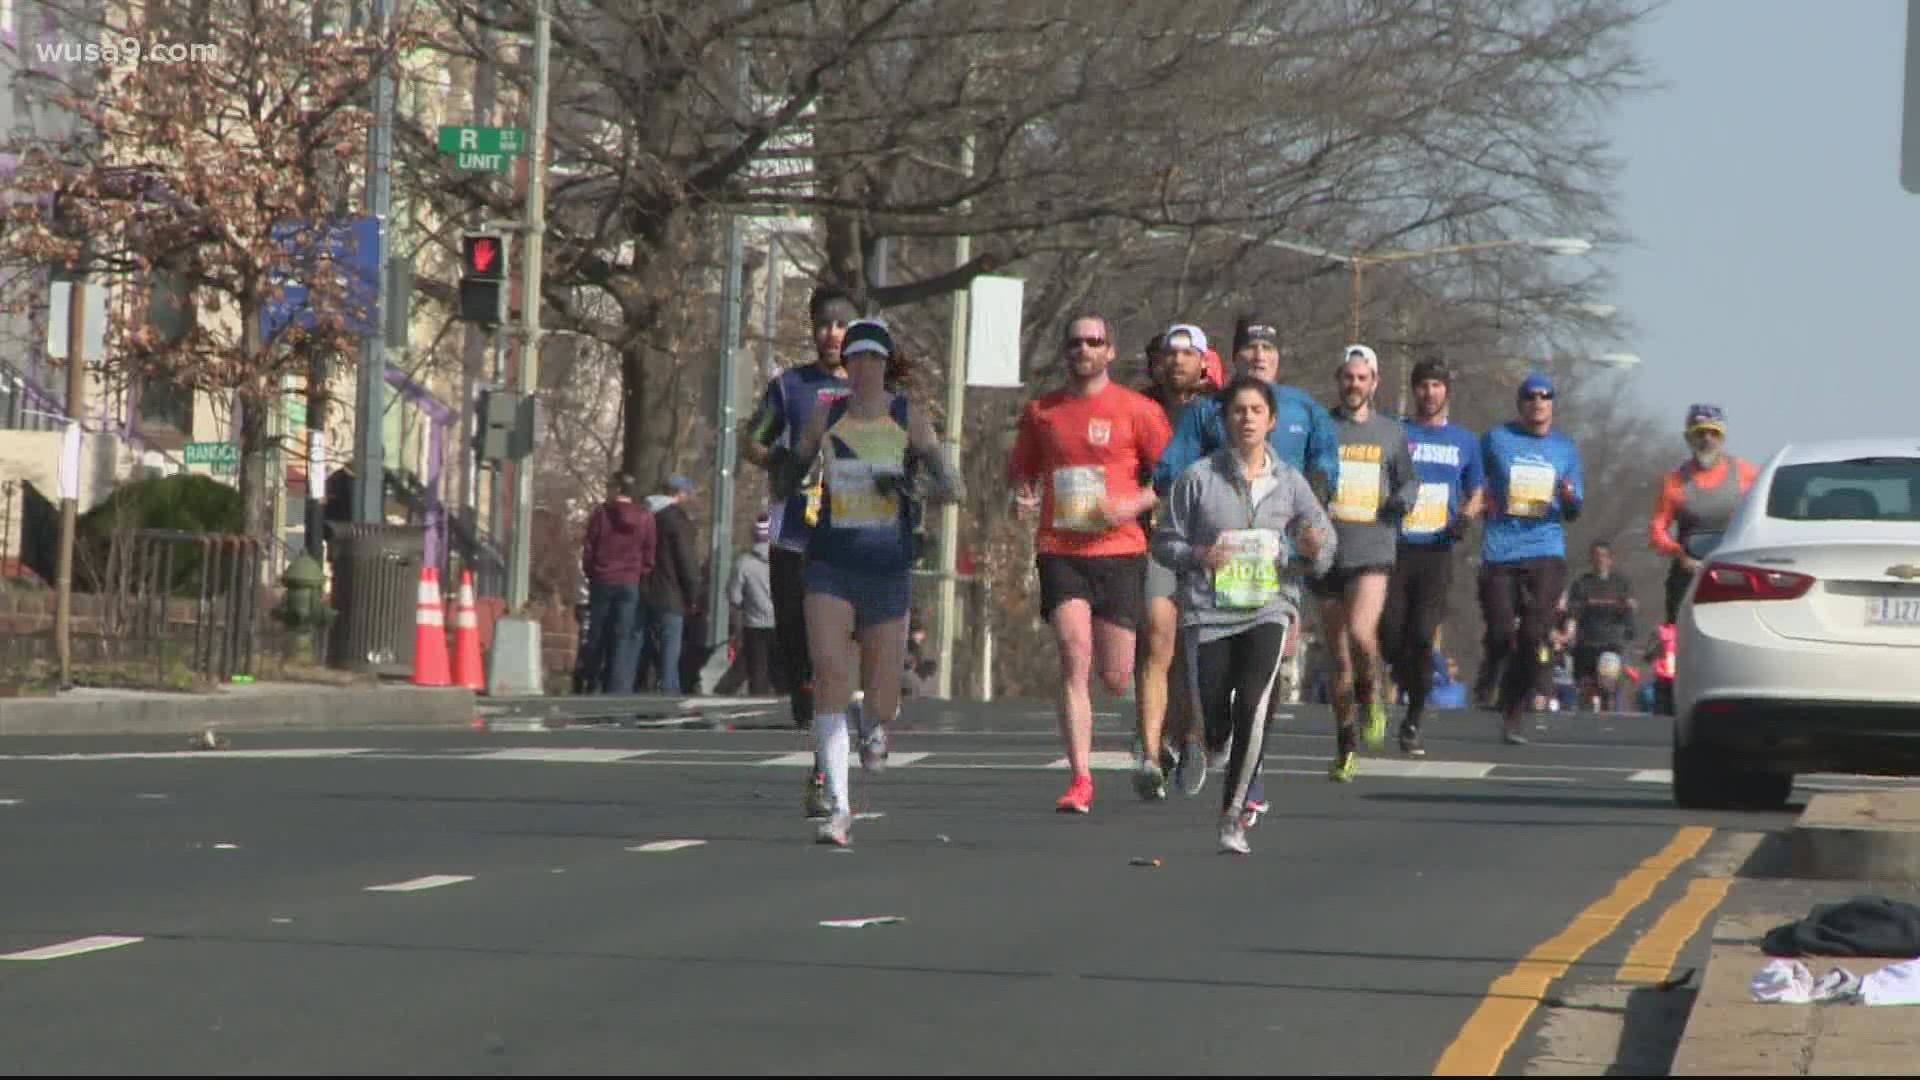 The energy is high as the Rock n' Roll Half Marathon celebrates its return to DC this weekend.